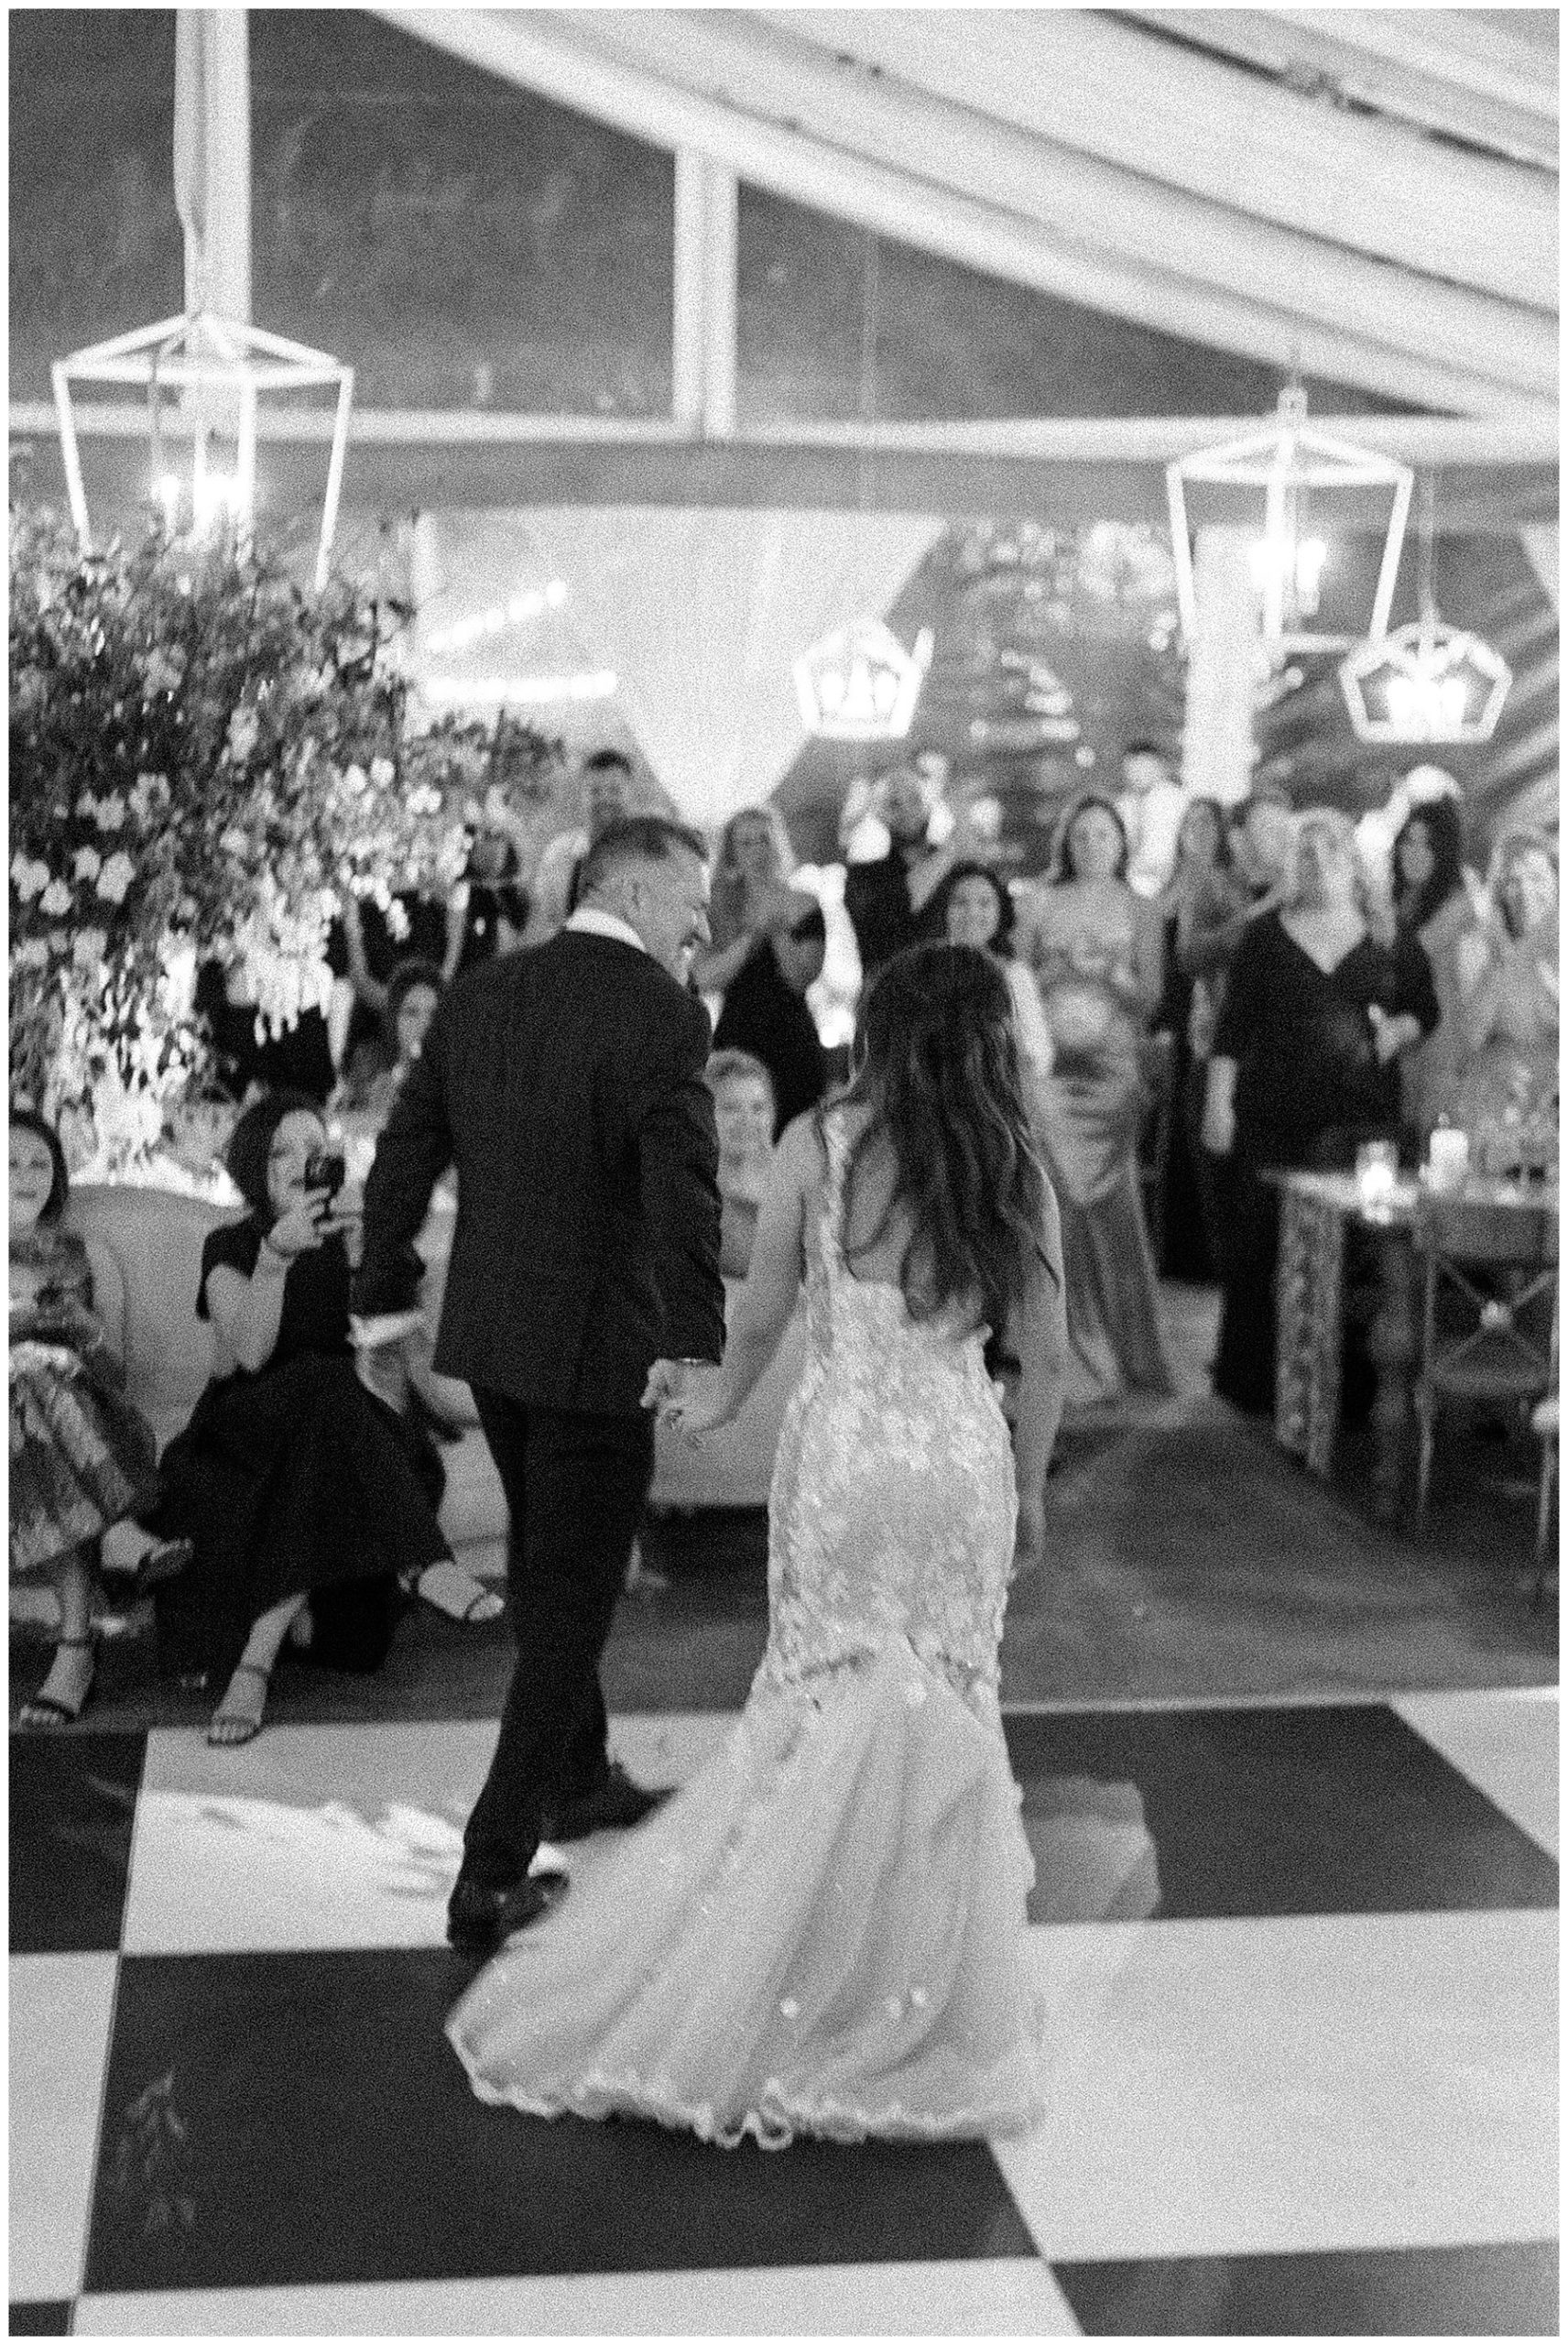 grainy black and white photo of couple walking on dance floor at Lowndes Grove